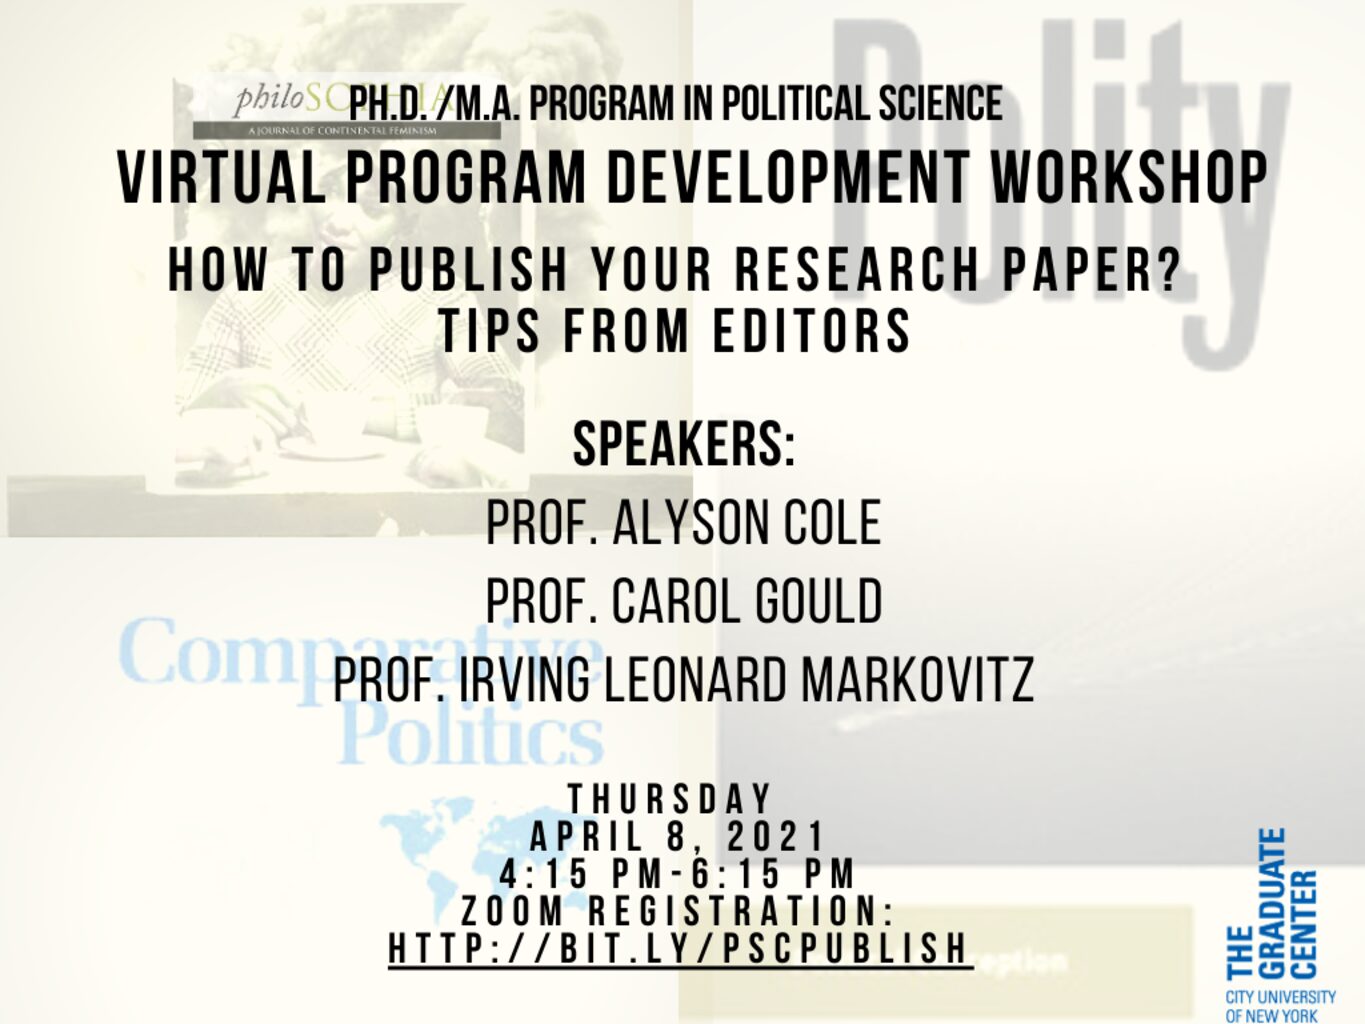 Professional Development Workshop: "How to Publish Your Research Paper? Tips From Editors" Thursday, April 8, 4:15pm